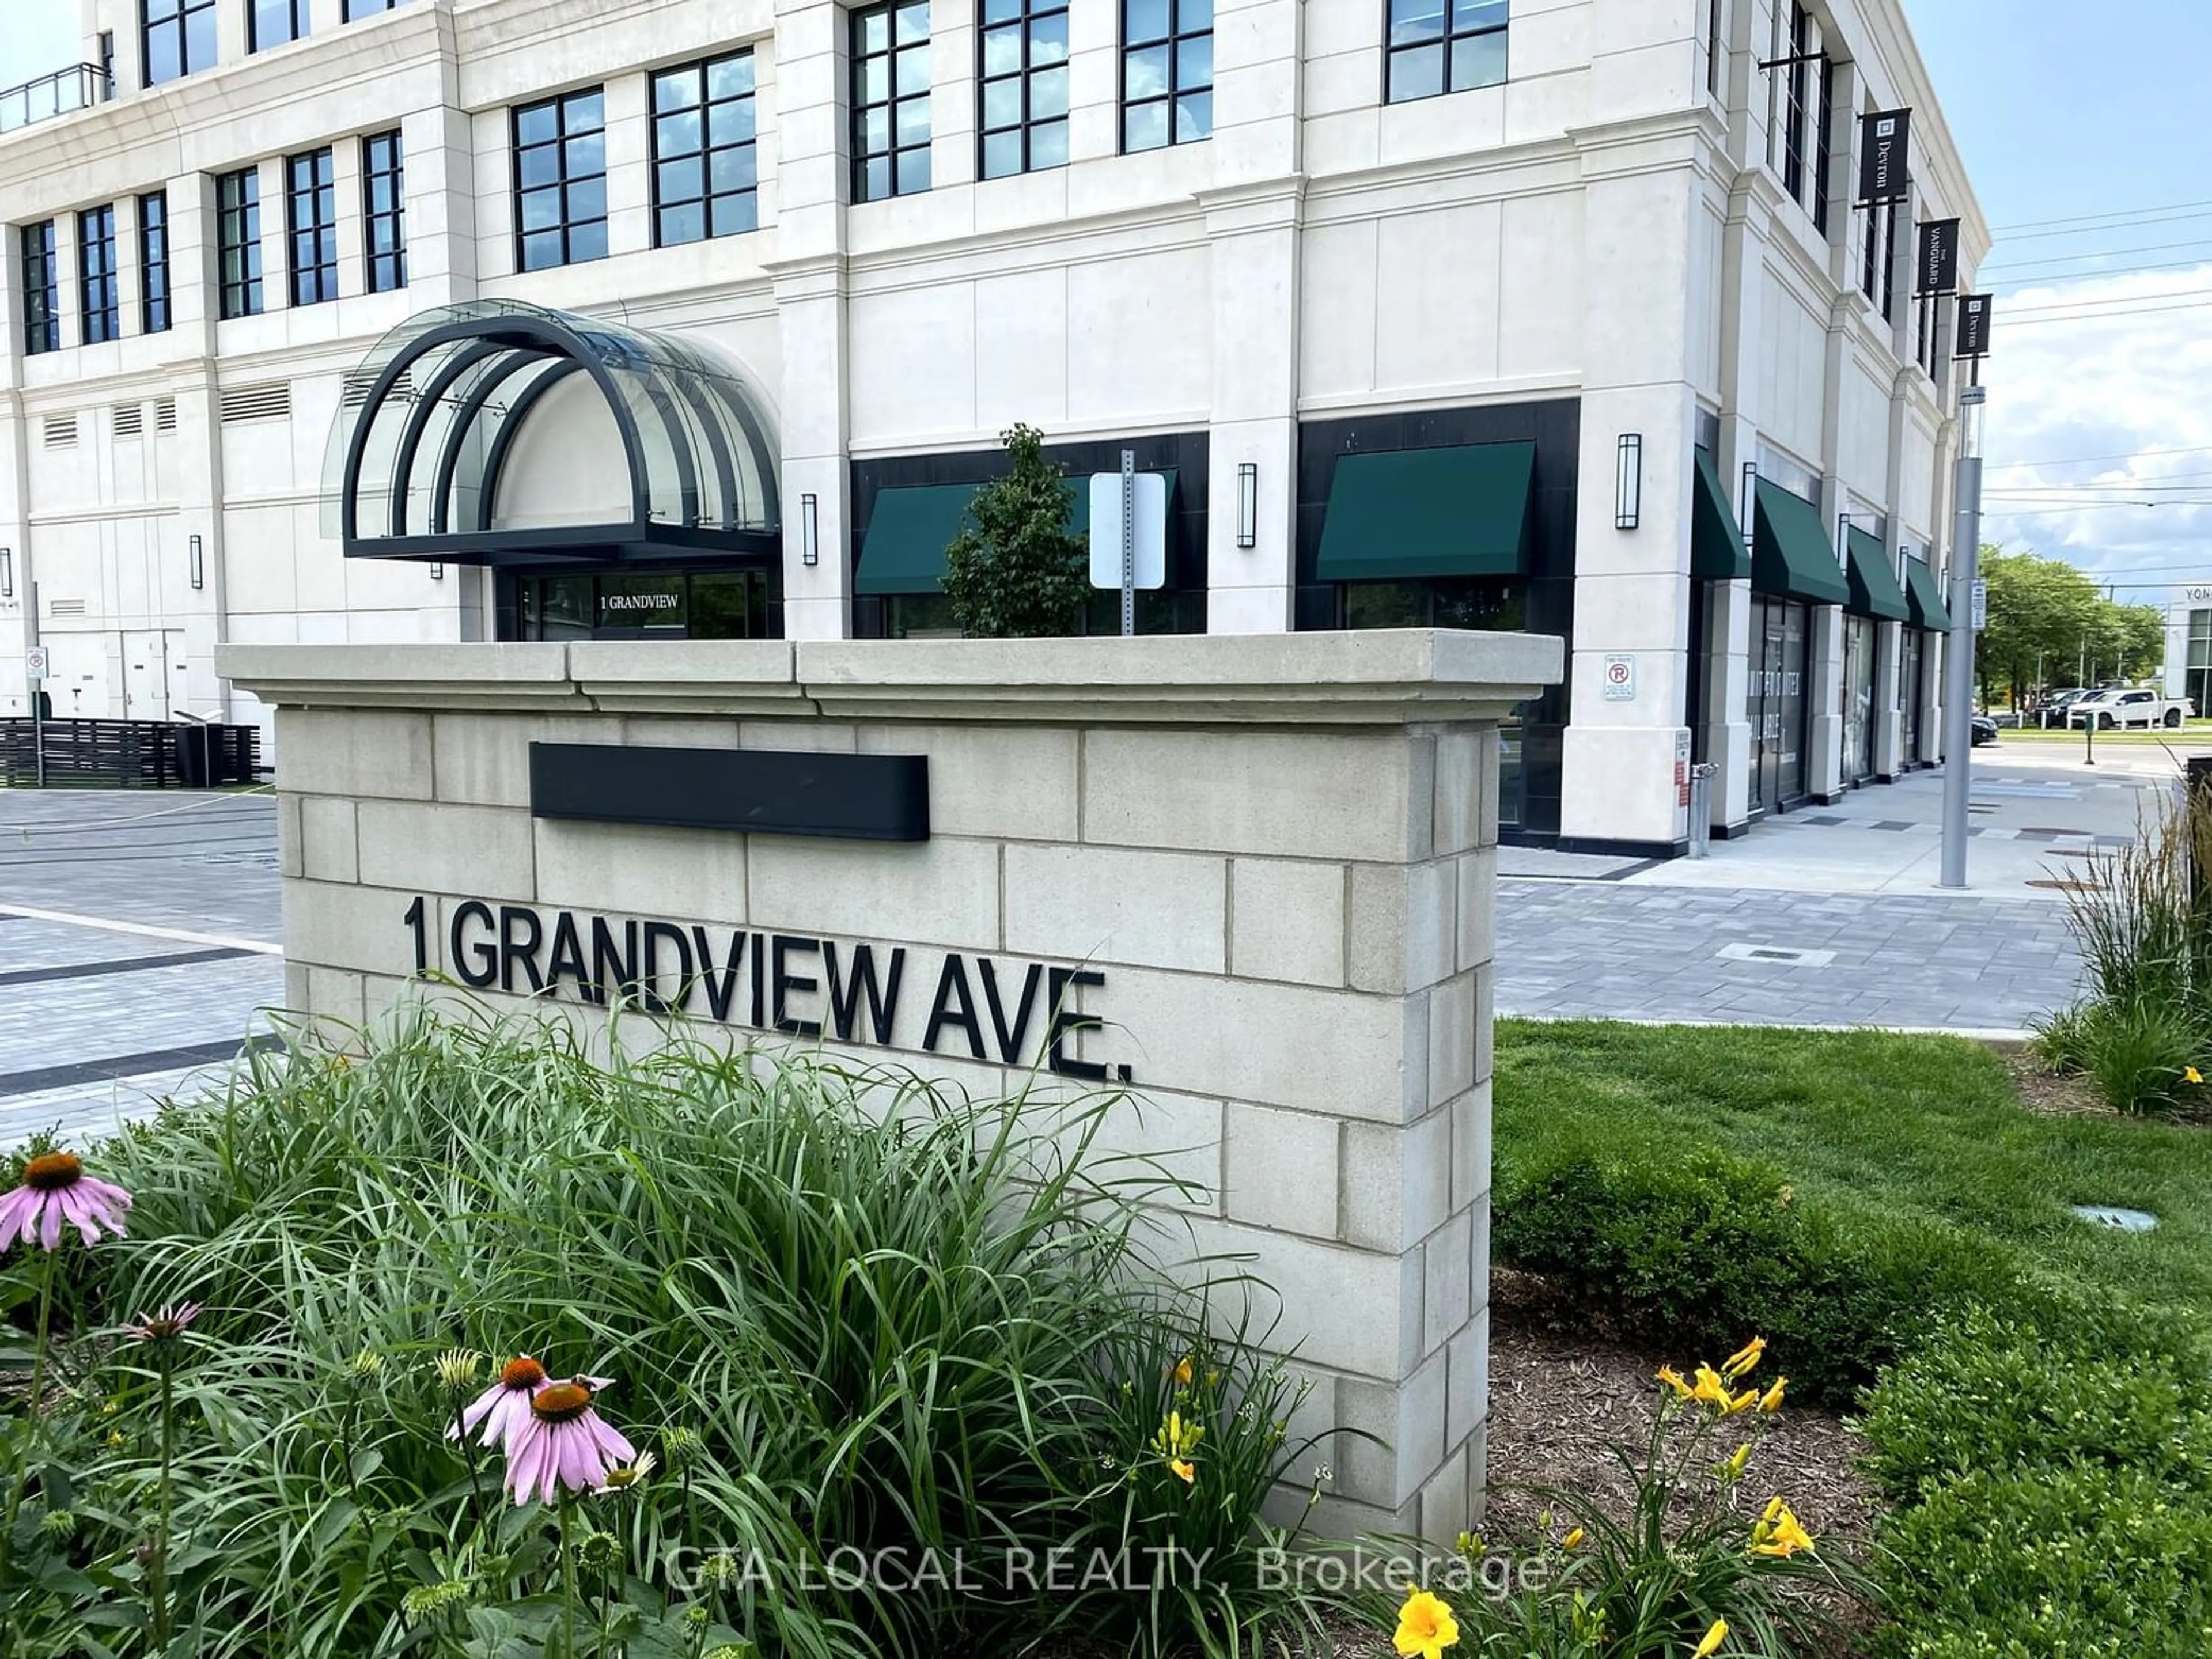 Street view for 1 Grandview Ave #503, Markham Ontario L3T 0G7